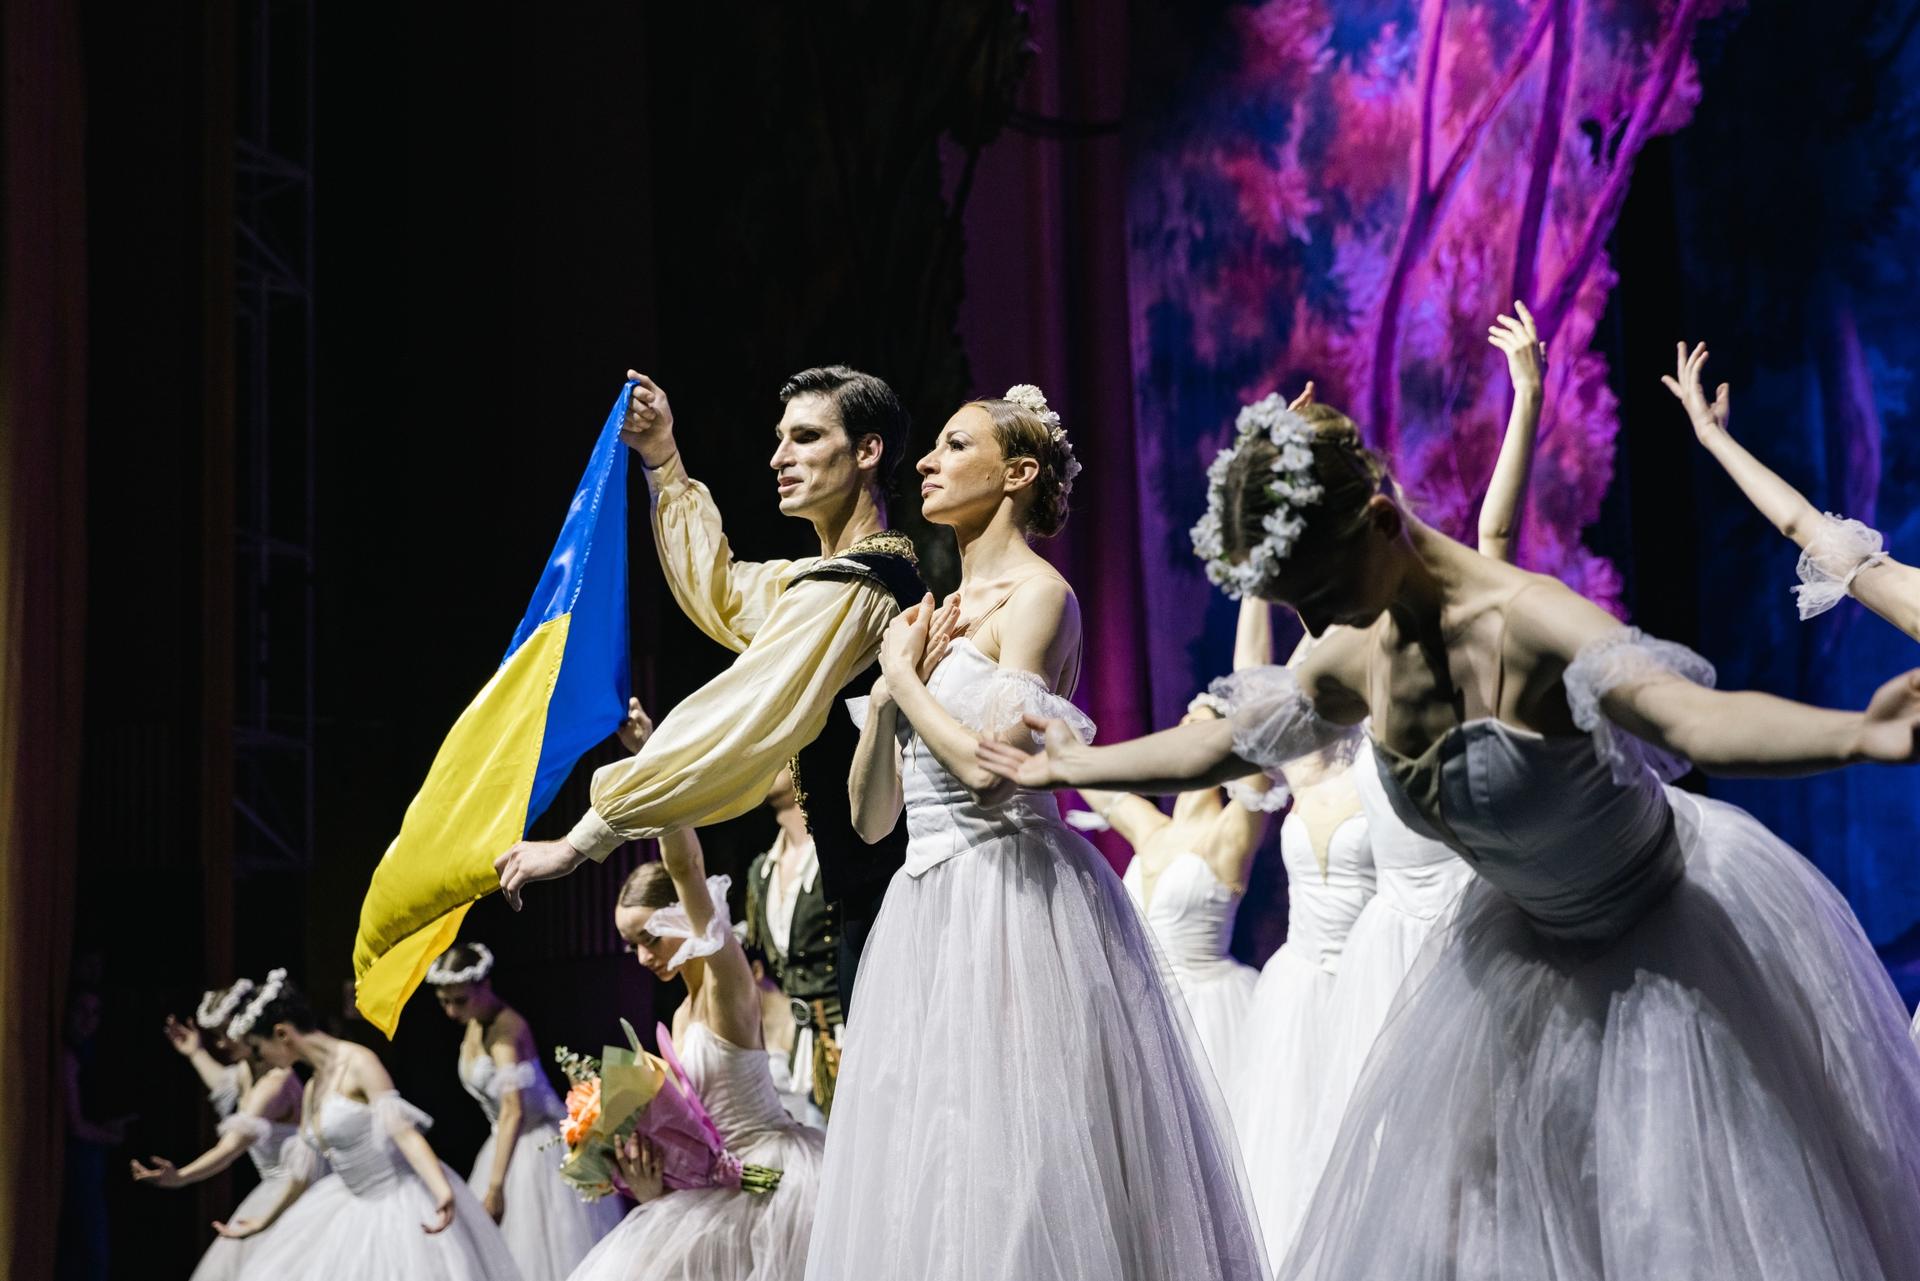 The Ukrainian Classical Ballet company bows with the Ukrainian flag following the playing of the Ukrainian national anthem in Bucharest, Ukraine.